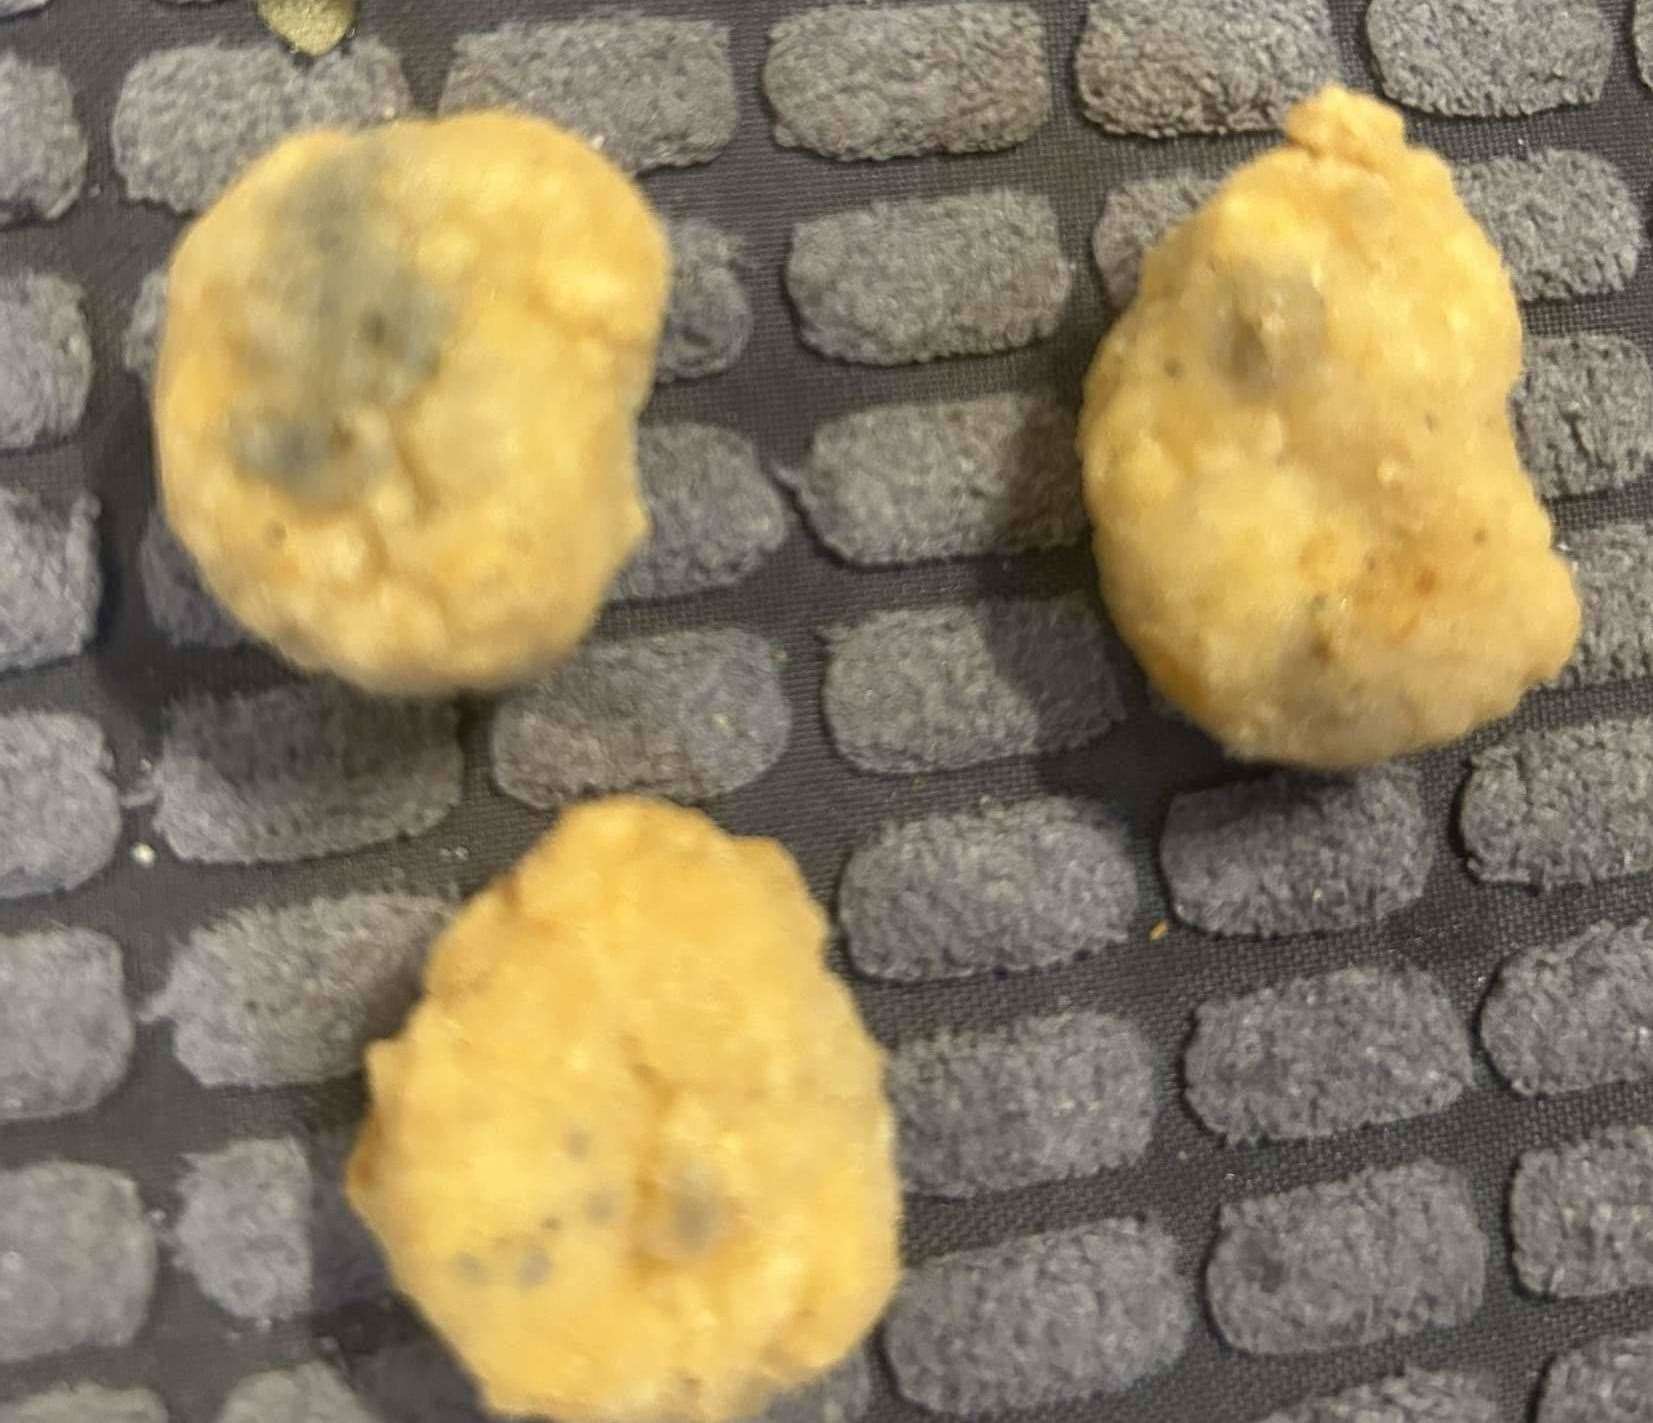 Stacey Piper was disgusted Cheriton KFC served mouldy popcorn chicken. Picture: Stacey Piper